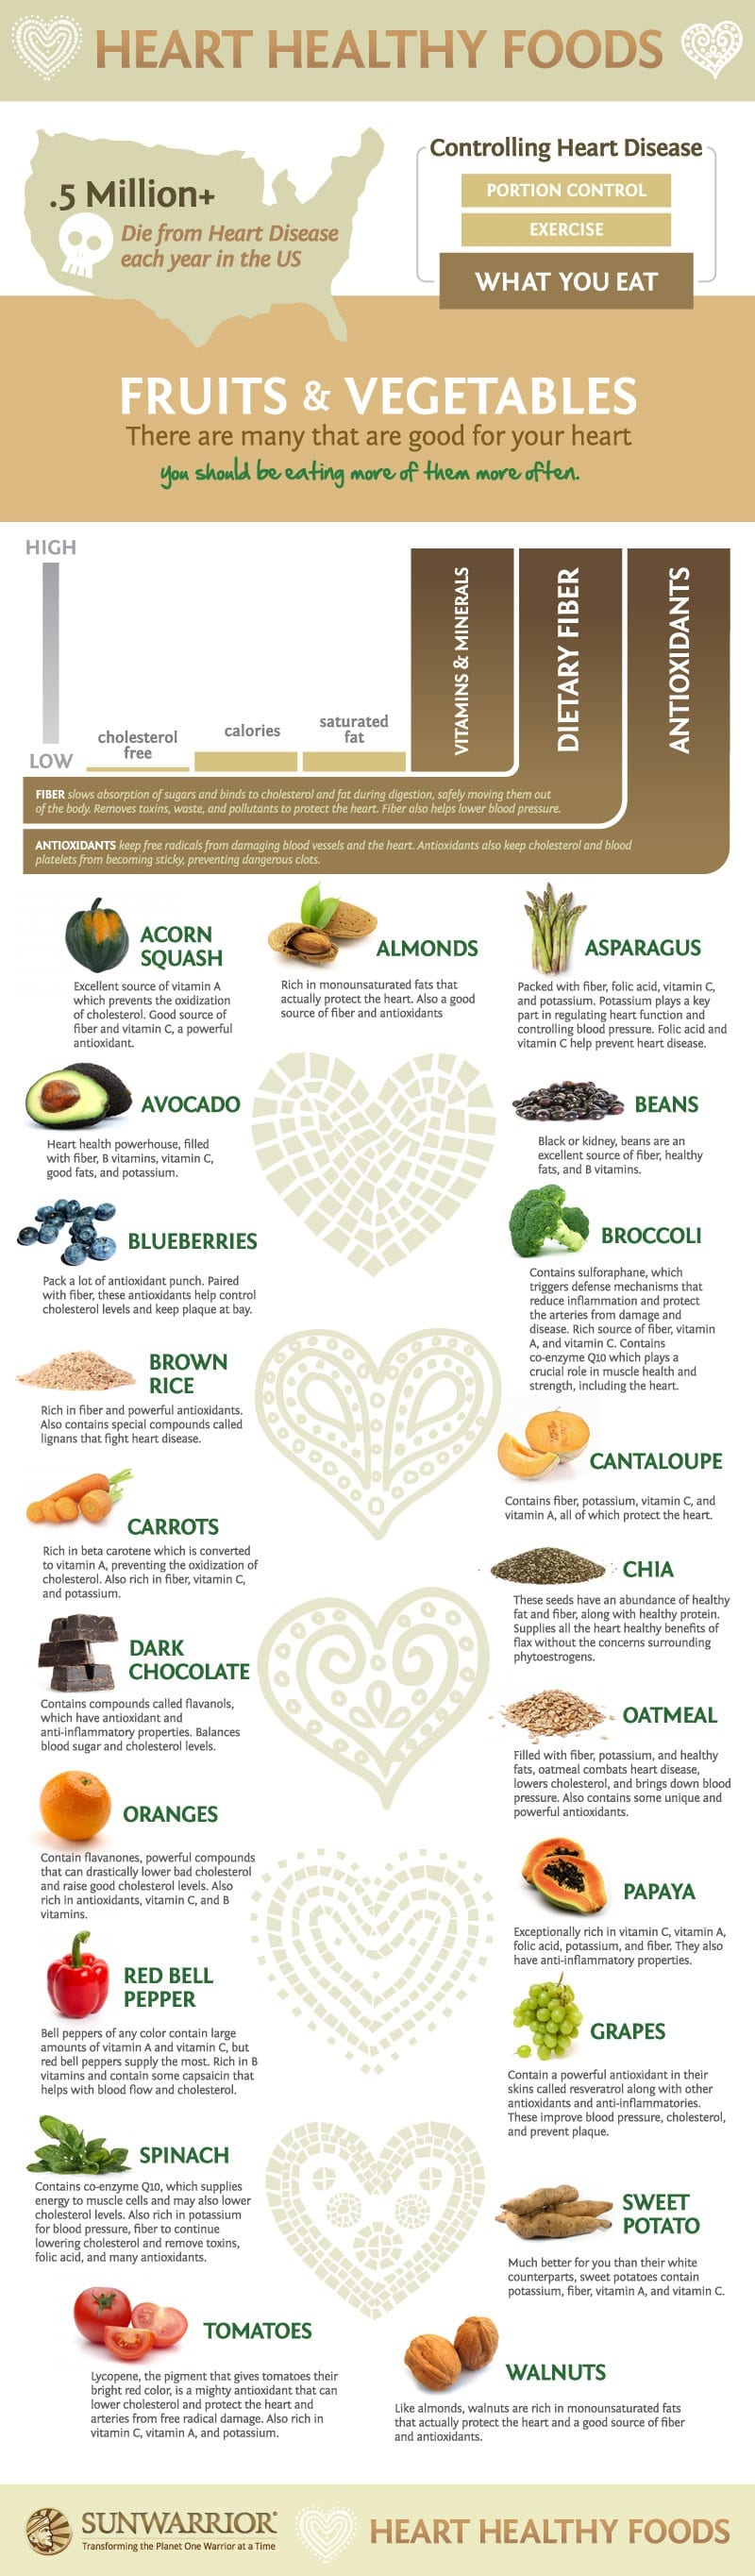 Heart Healthy Fruits and Vegetables